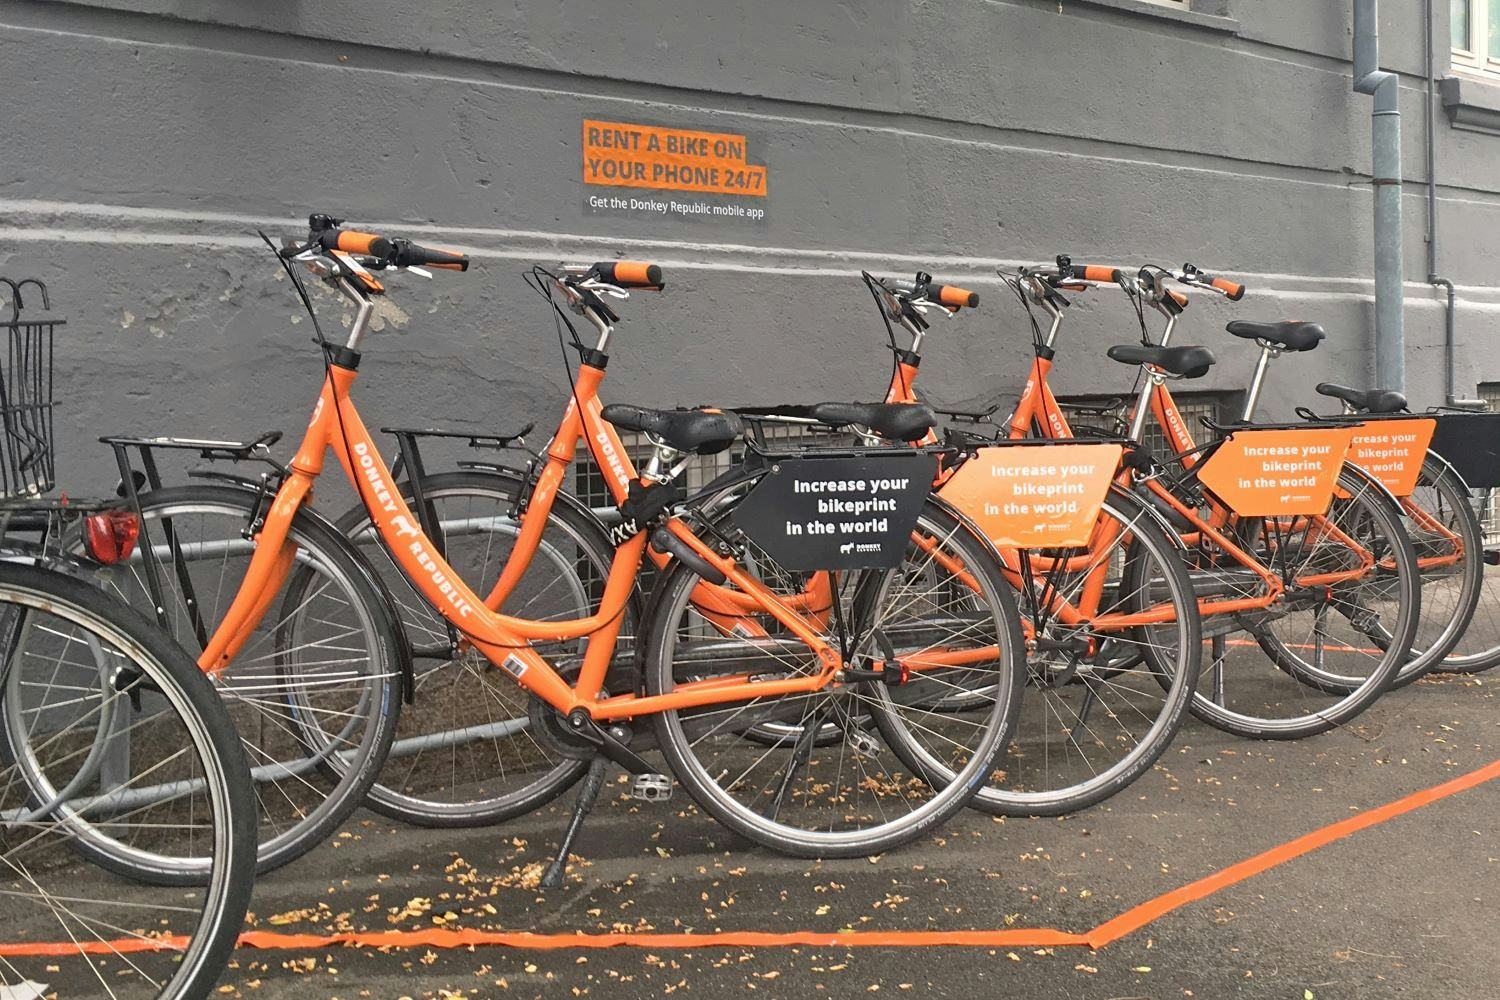 Will the orange bikes of Donkey Republic soon be found in new cities across Europe? – Photo Donkey Republic 